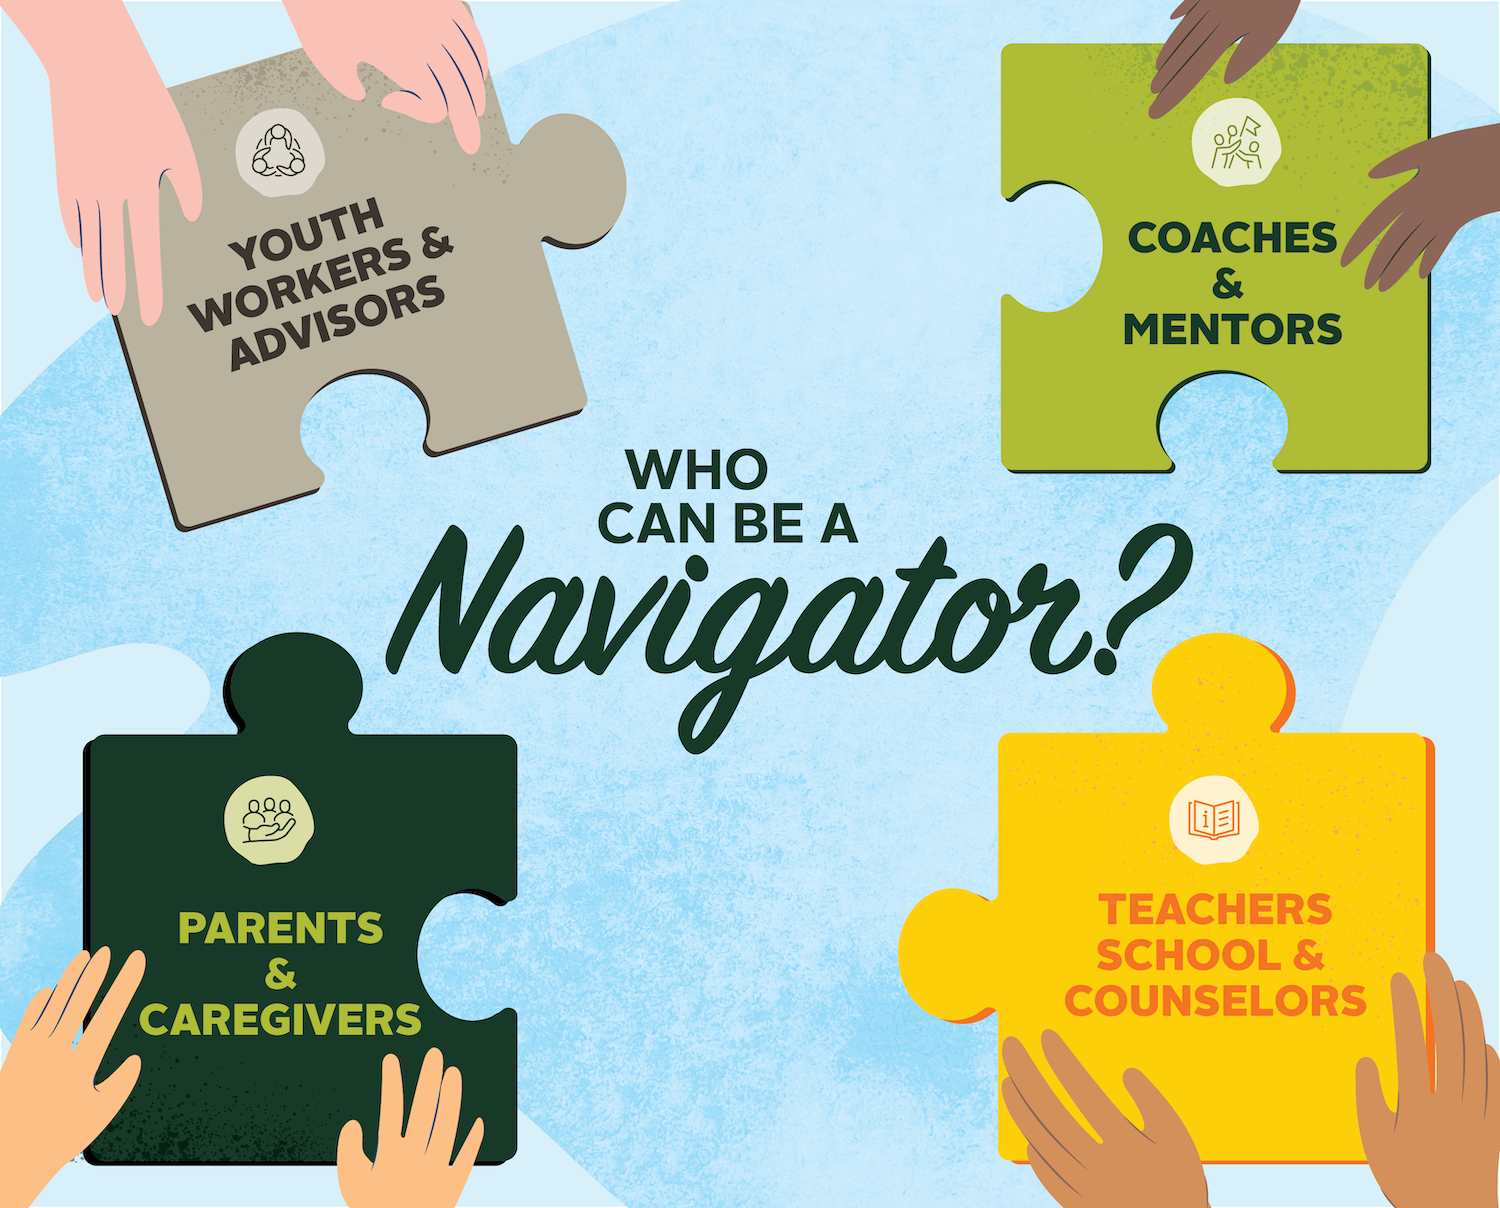 who can be a navigator?